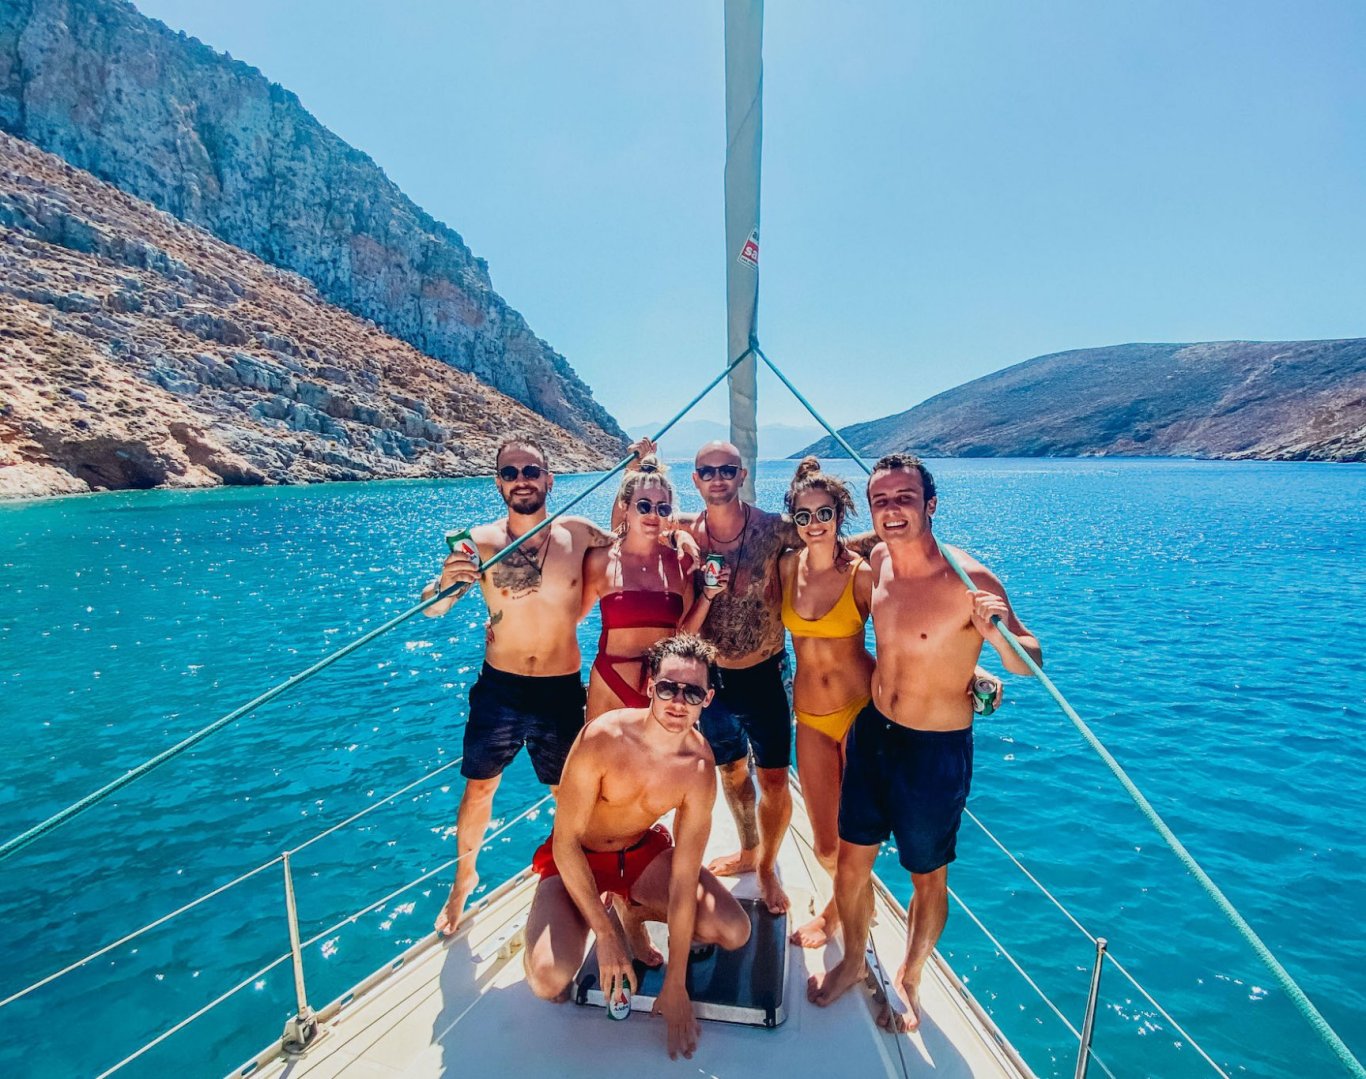 A group in swim wear on a sail boat in Corfu, Greece, surrounded by bright blue turquoise water and mountainous landscapes 